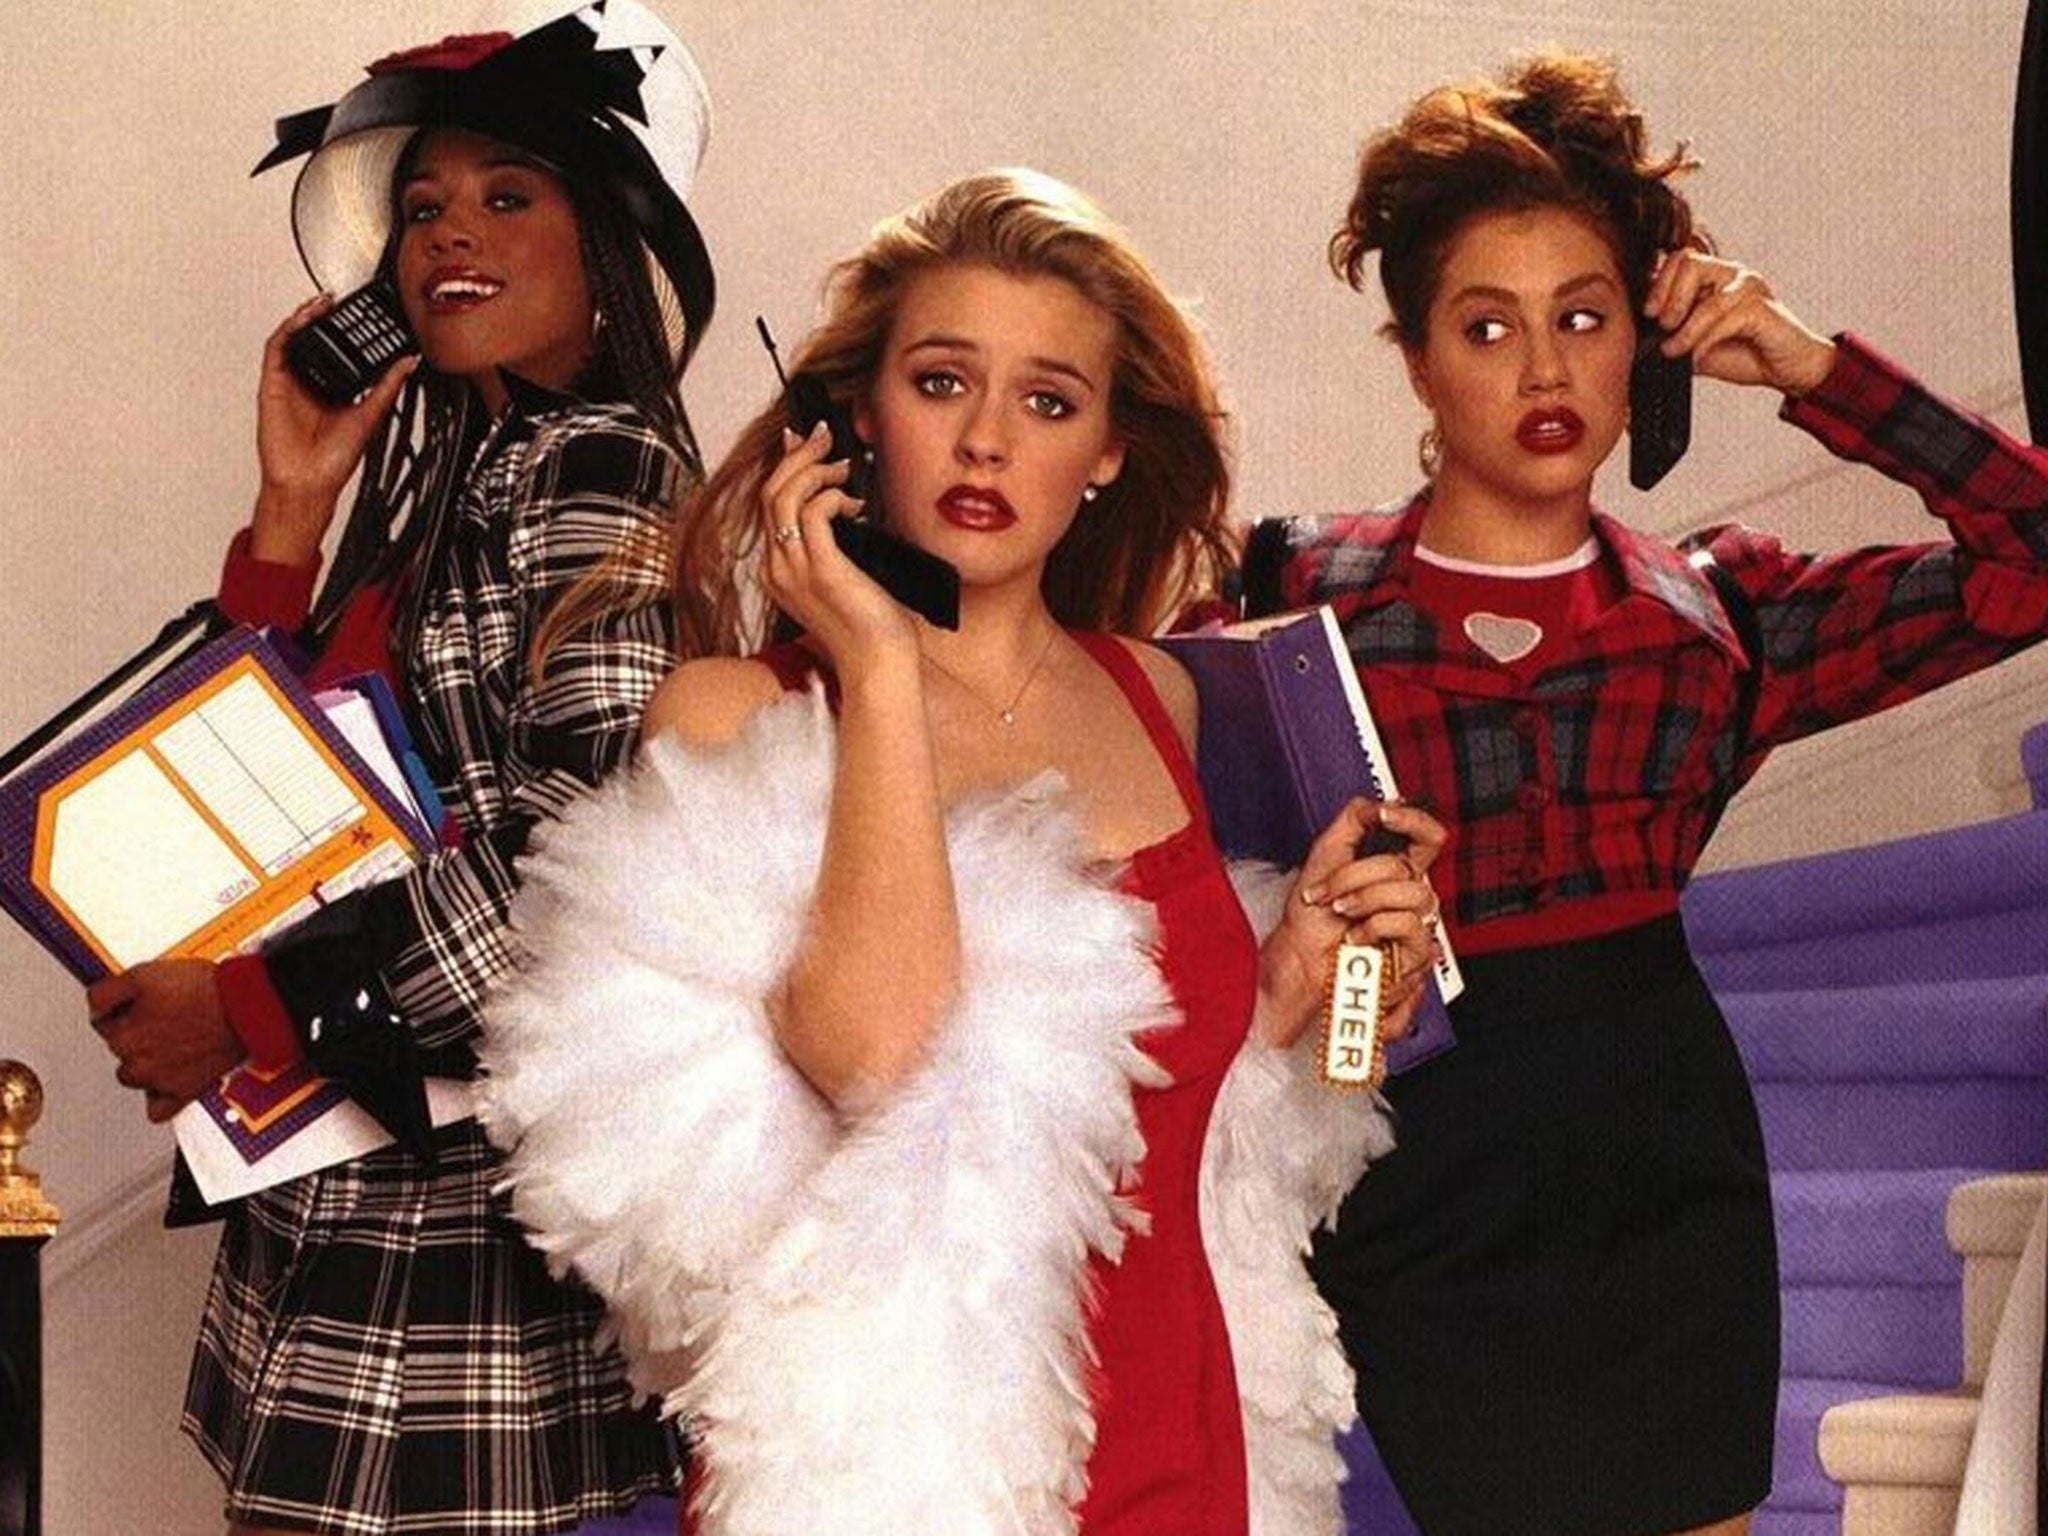 A still from the 1995 film 'Clueless'